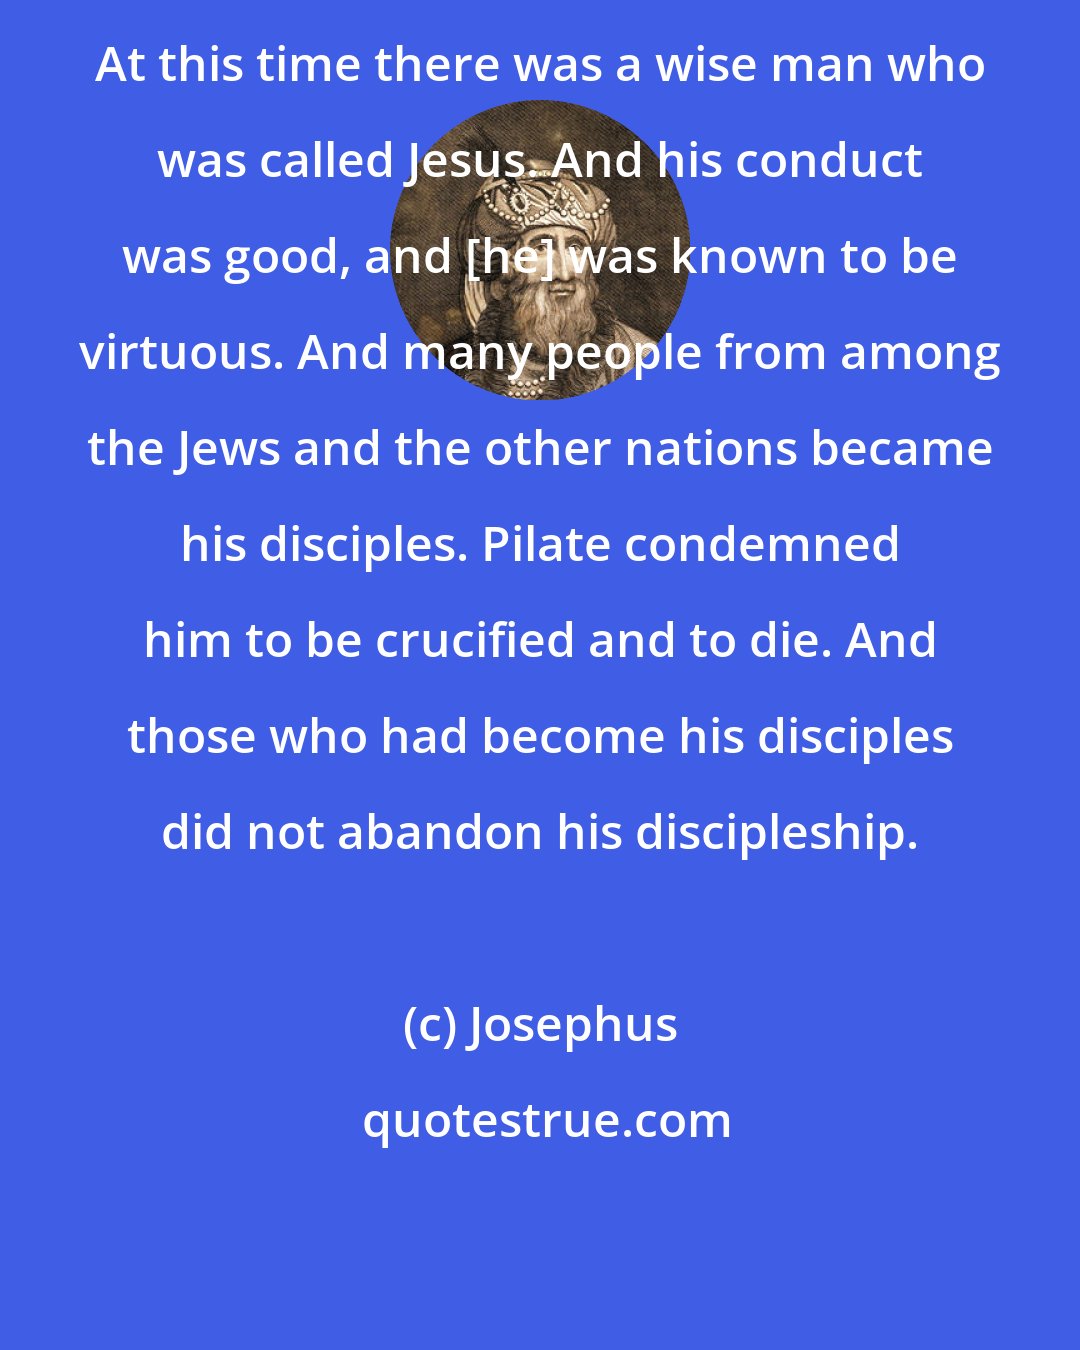 Josephus: At this time there was a wise man who was called Jesus. And his conduct was good, and [he] was known to be virtuous. And many people from among the Jews and the other nations became his disciples. Pilate condemned him to be crucified and to die. And those who had become his disciples did not abandon his discipleship.